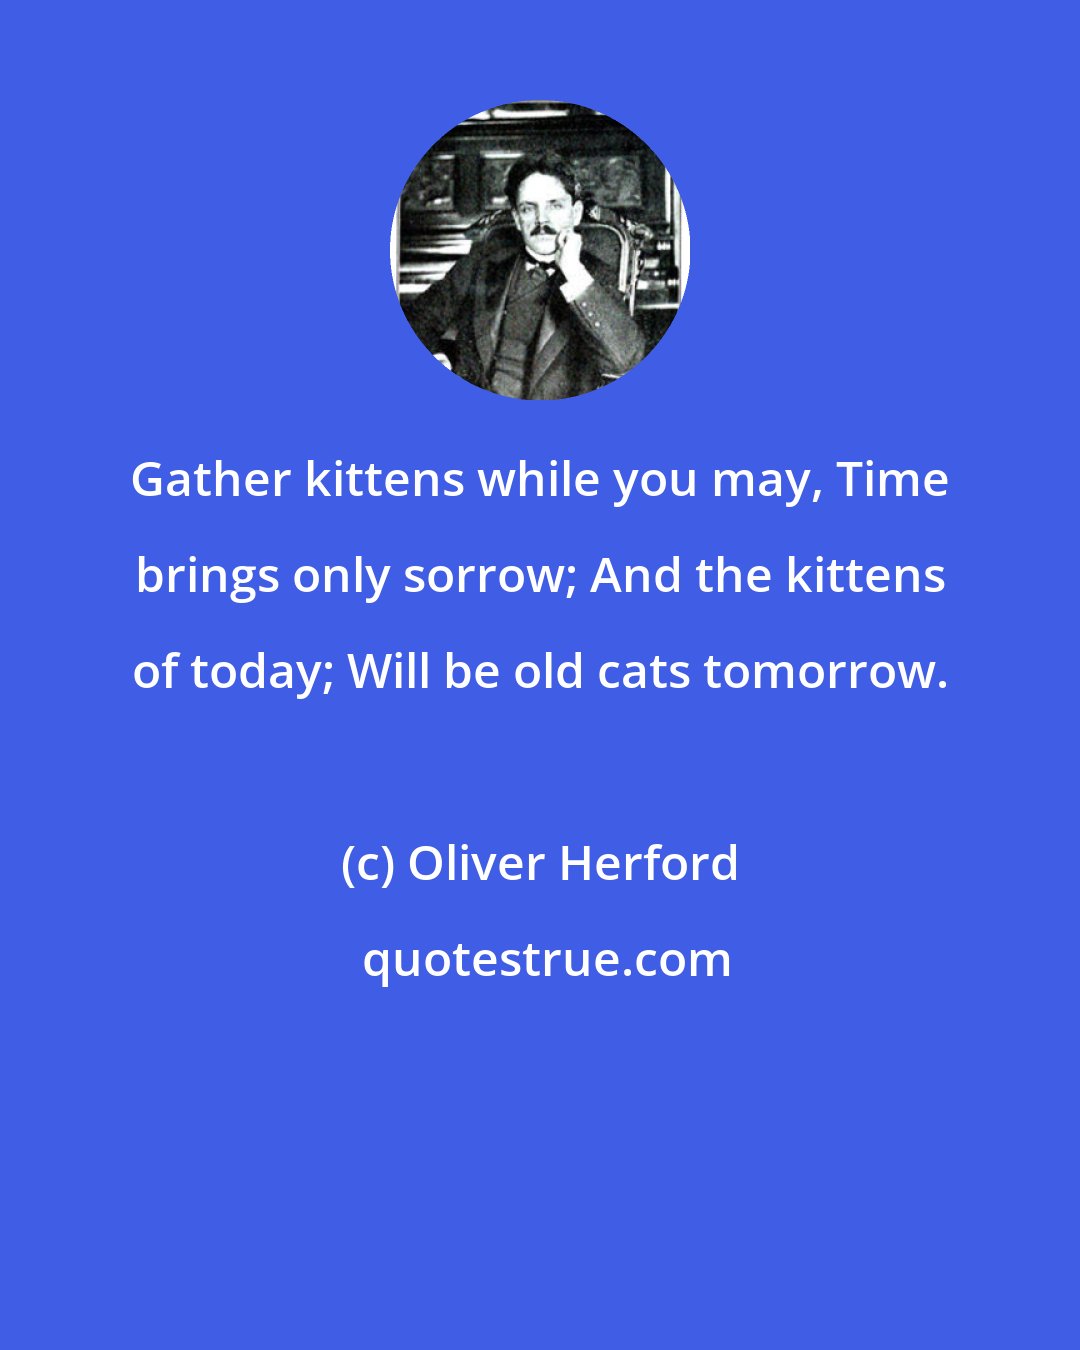 Oliver Herford: Gather kittens while you may, Time brings only sorrow; And the kittens of today; Will be old cats tomorrow.